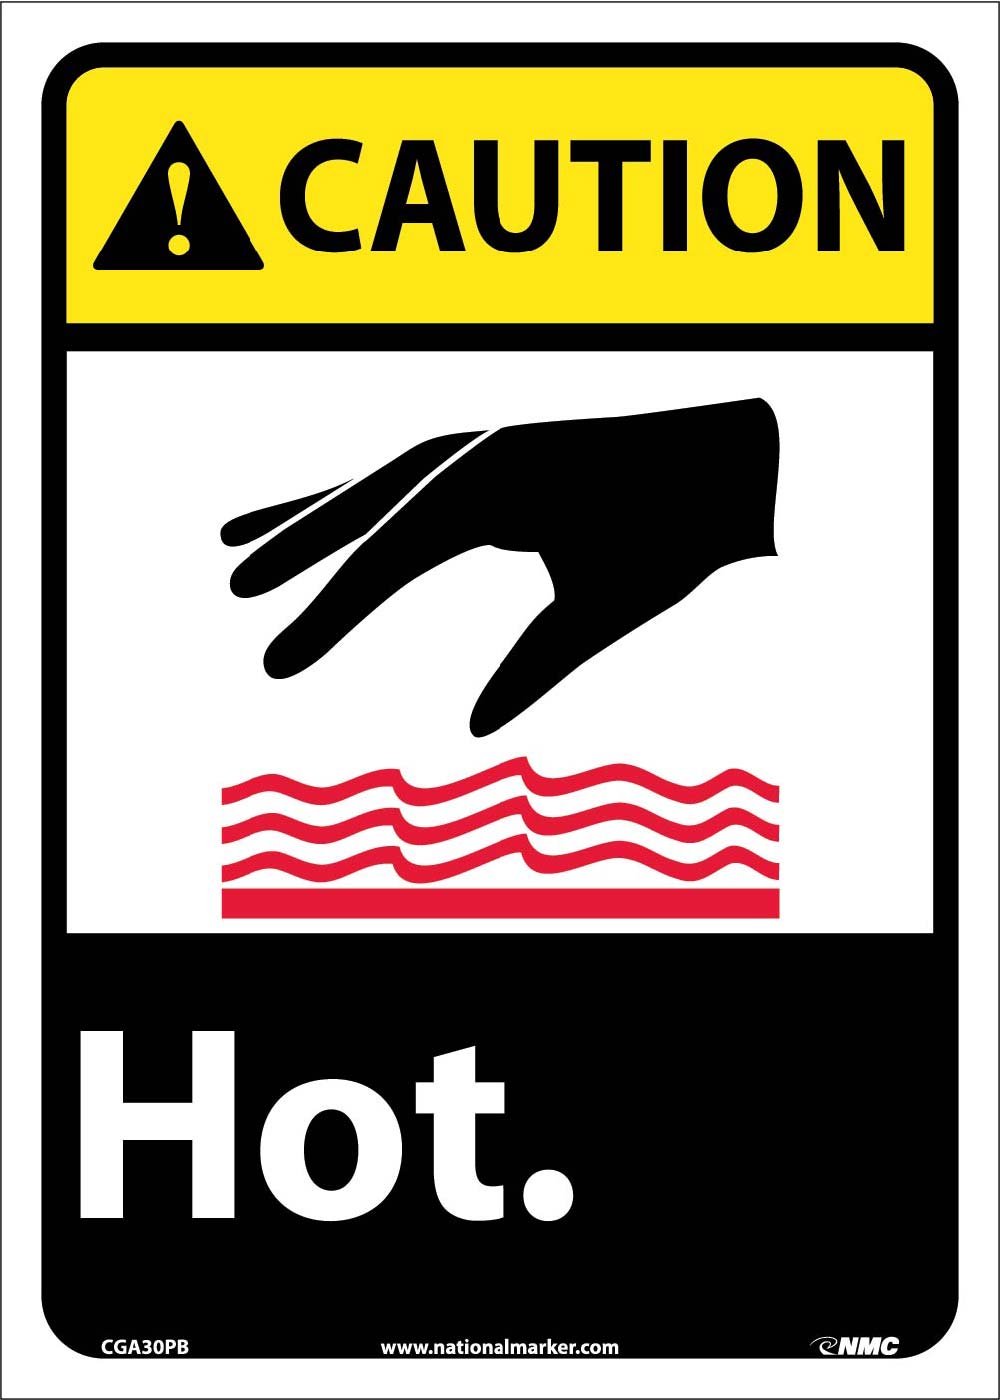 Caution Hot Sign-eSafety Supplies, Inc